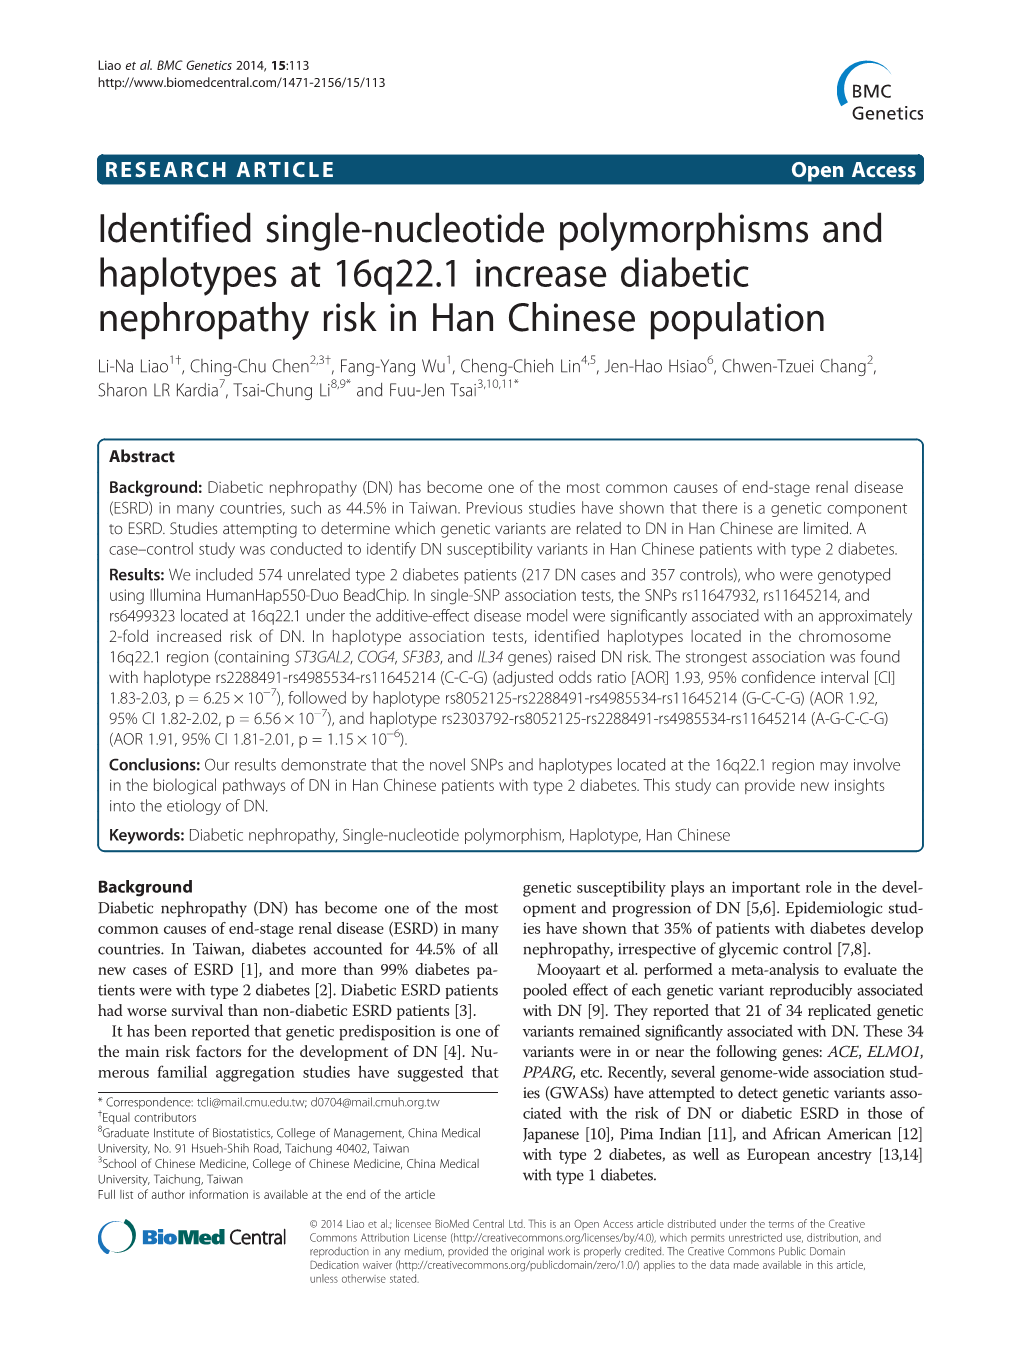 Identified Single-Nucleotide Polymorphisms and Haplotypes At